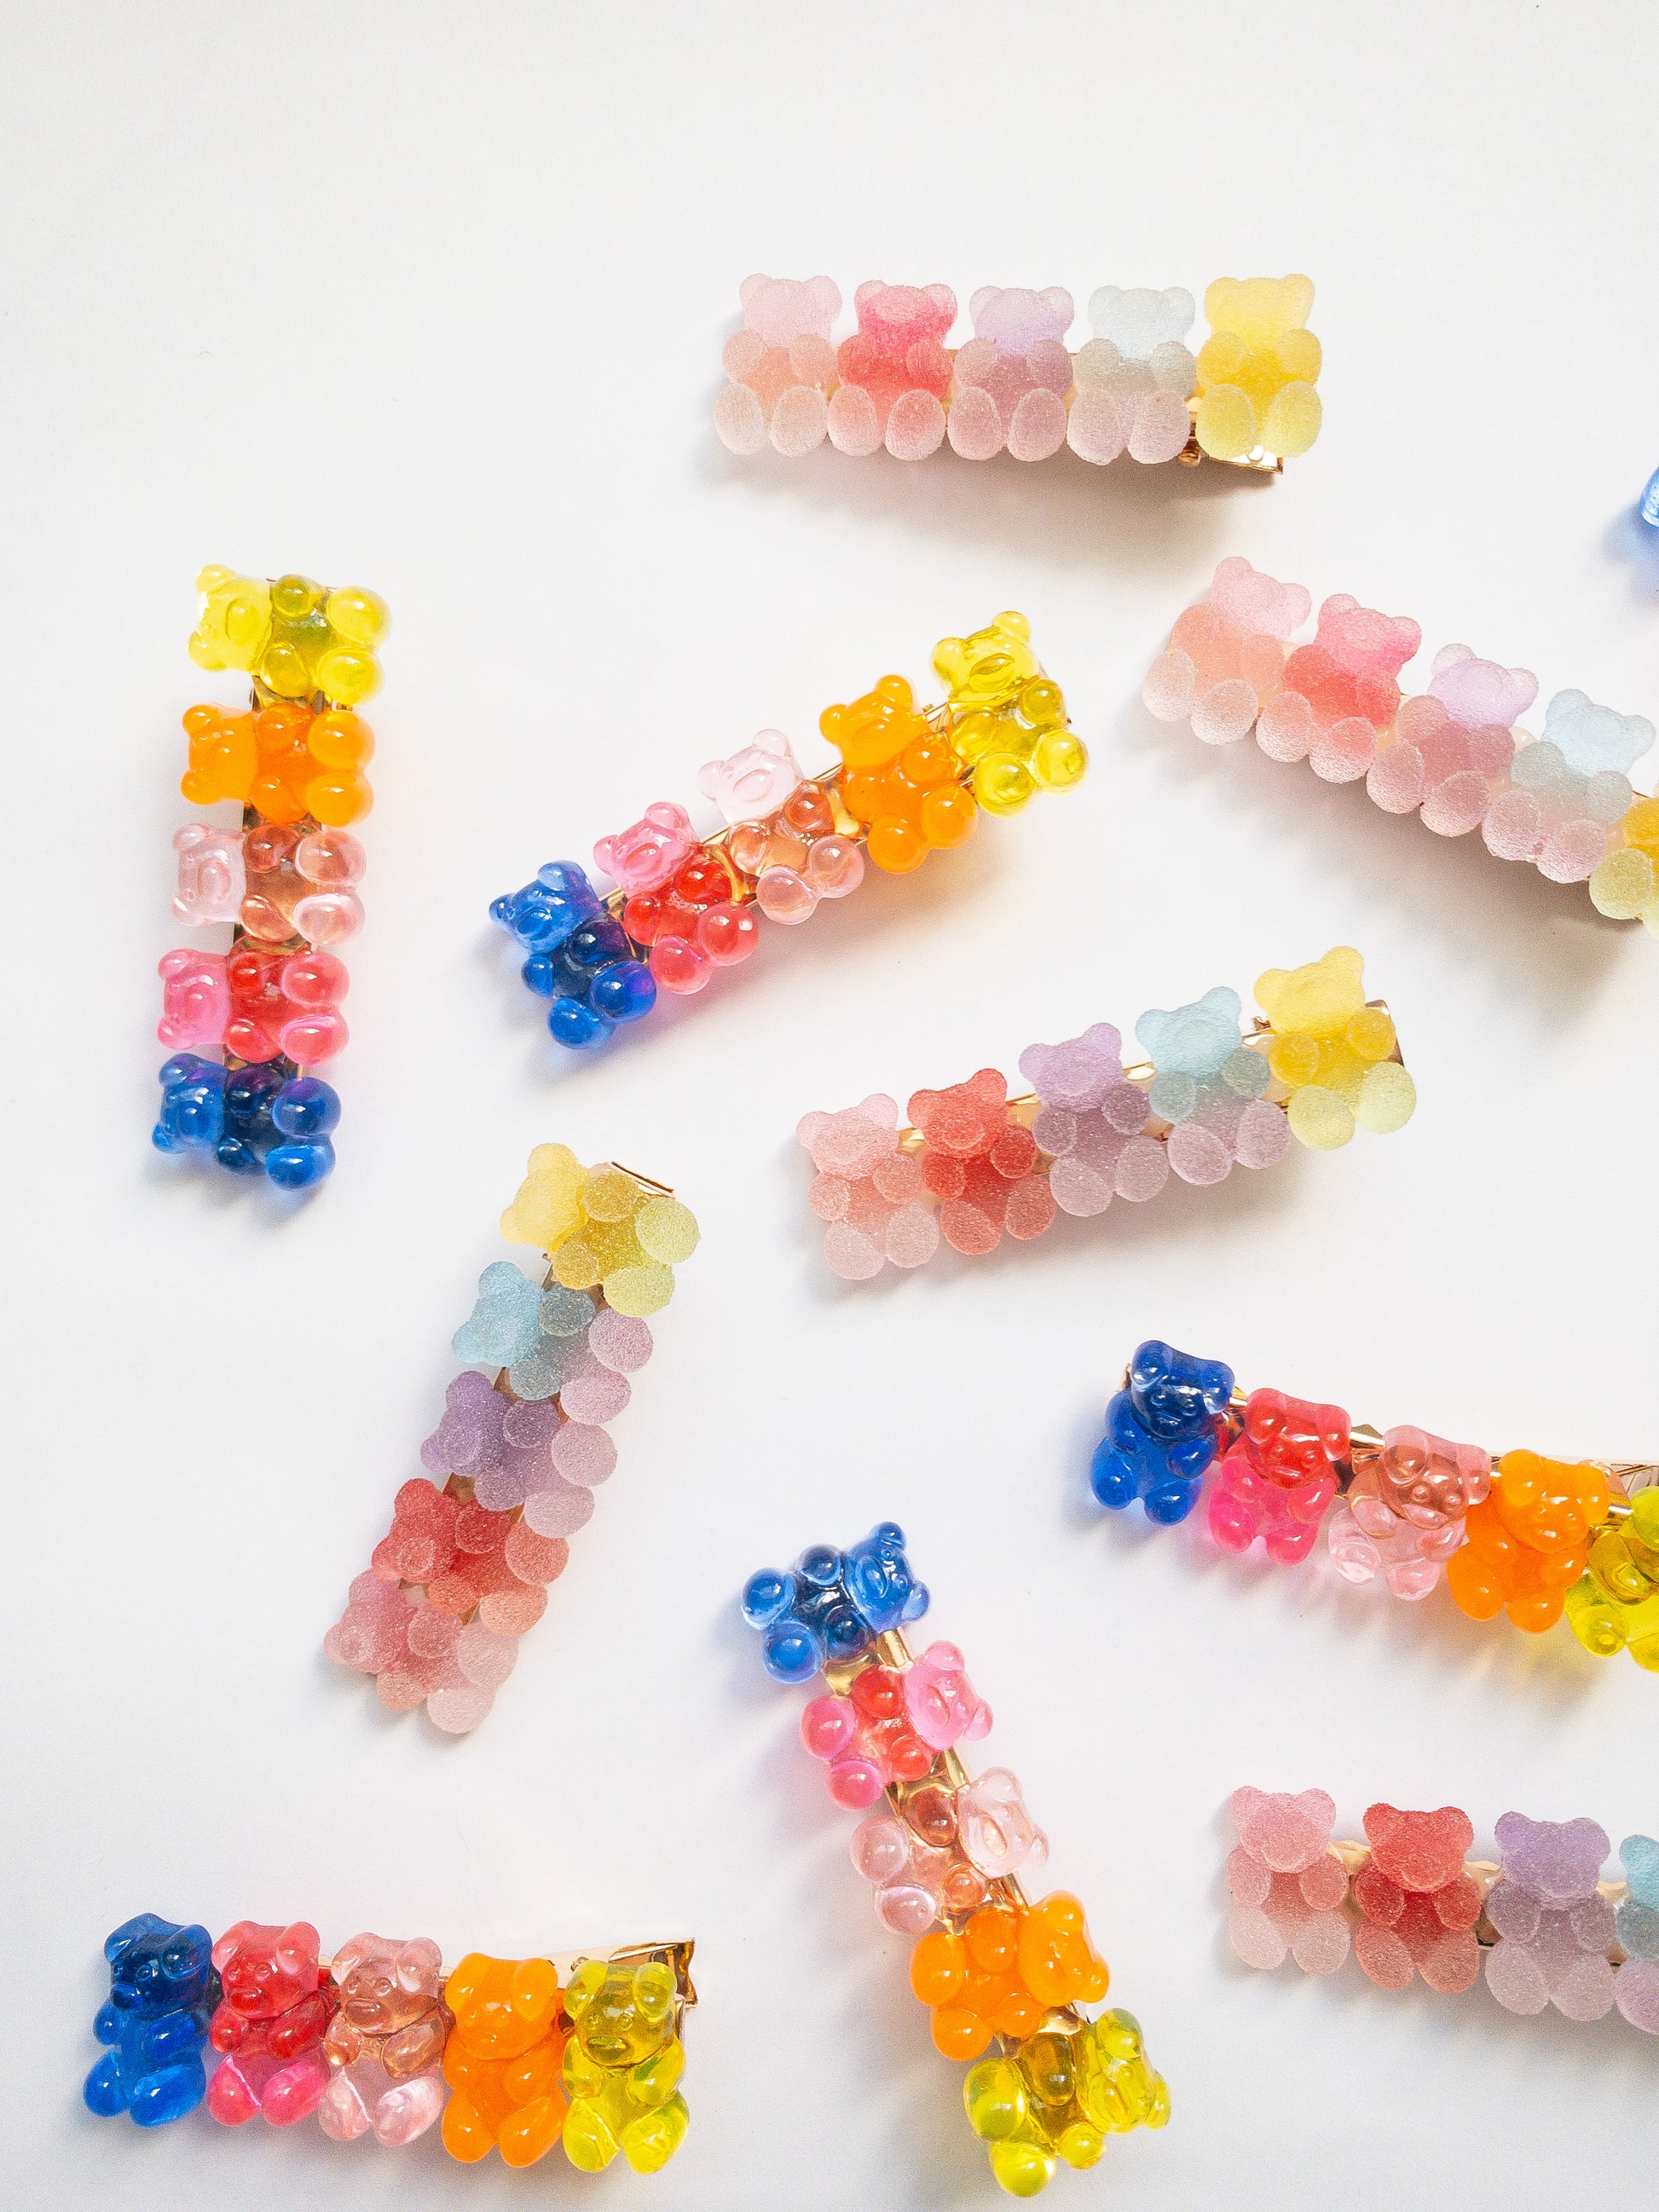 Yummy gummy bear family! The most adorable gummy bear shaped hair clips come as a 4 piece set: two frosted, sugary gummy bears and two translucent rainbow colored gummy bears. Each is on a gold colored alligator clip. 